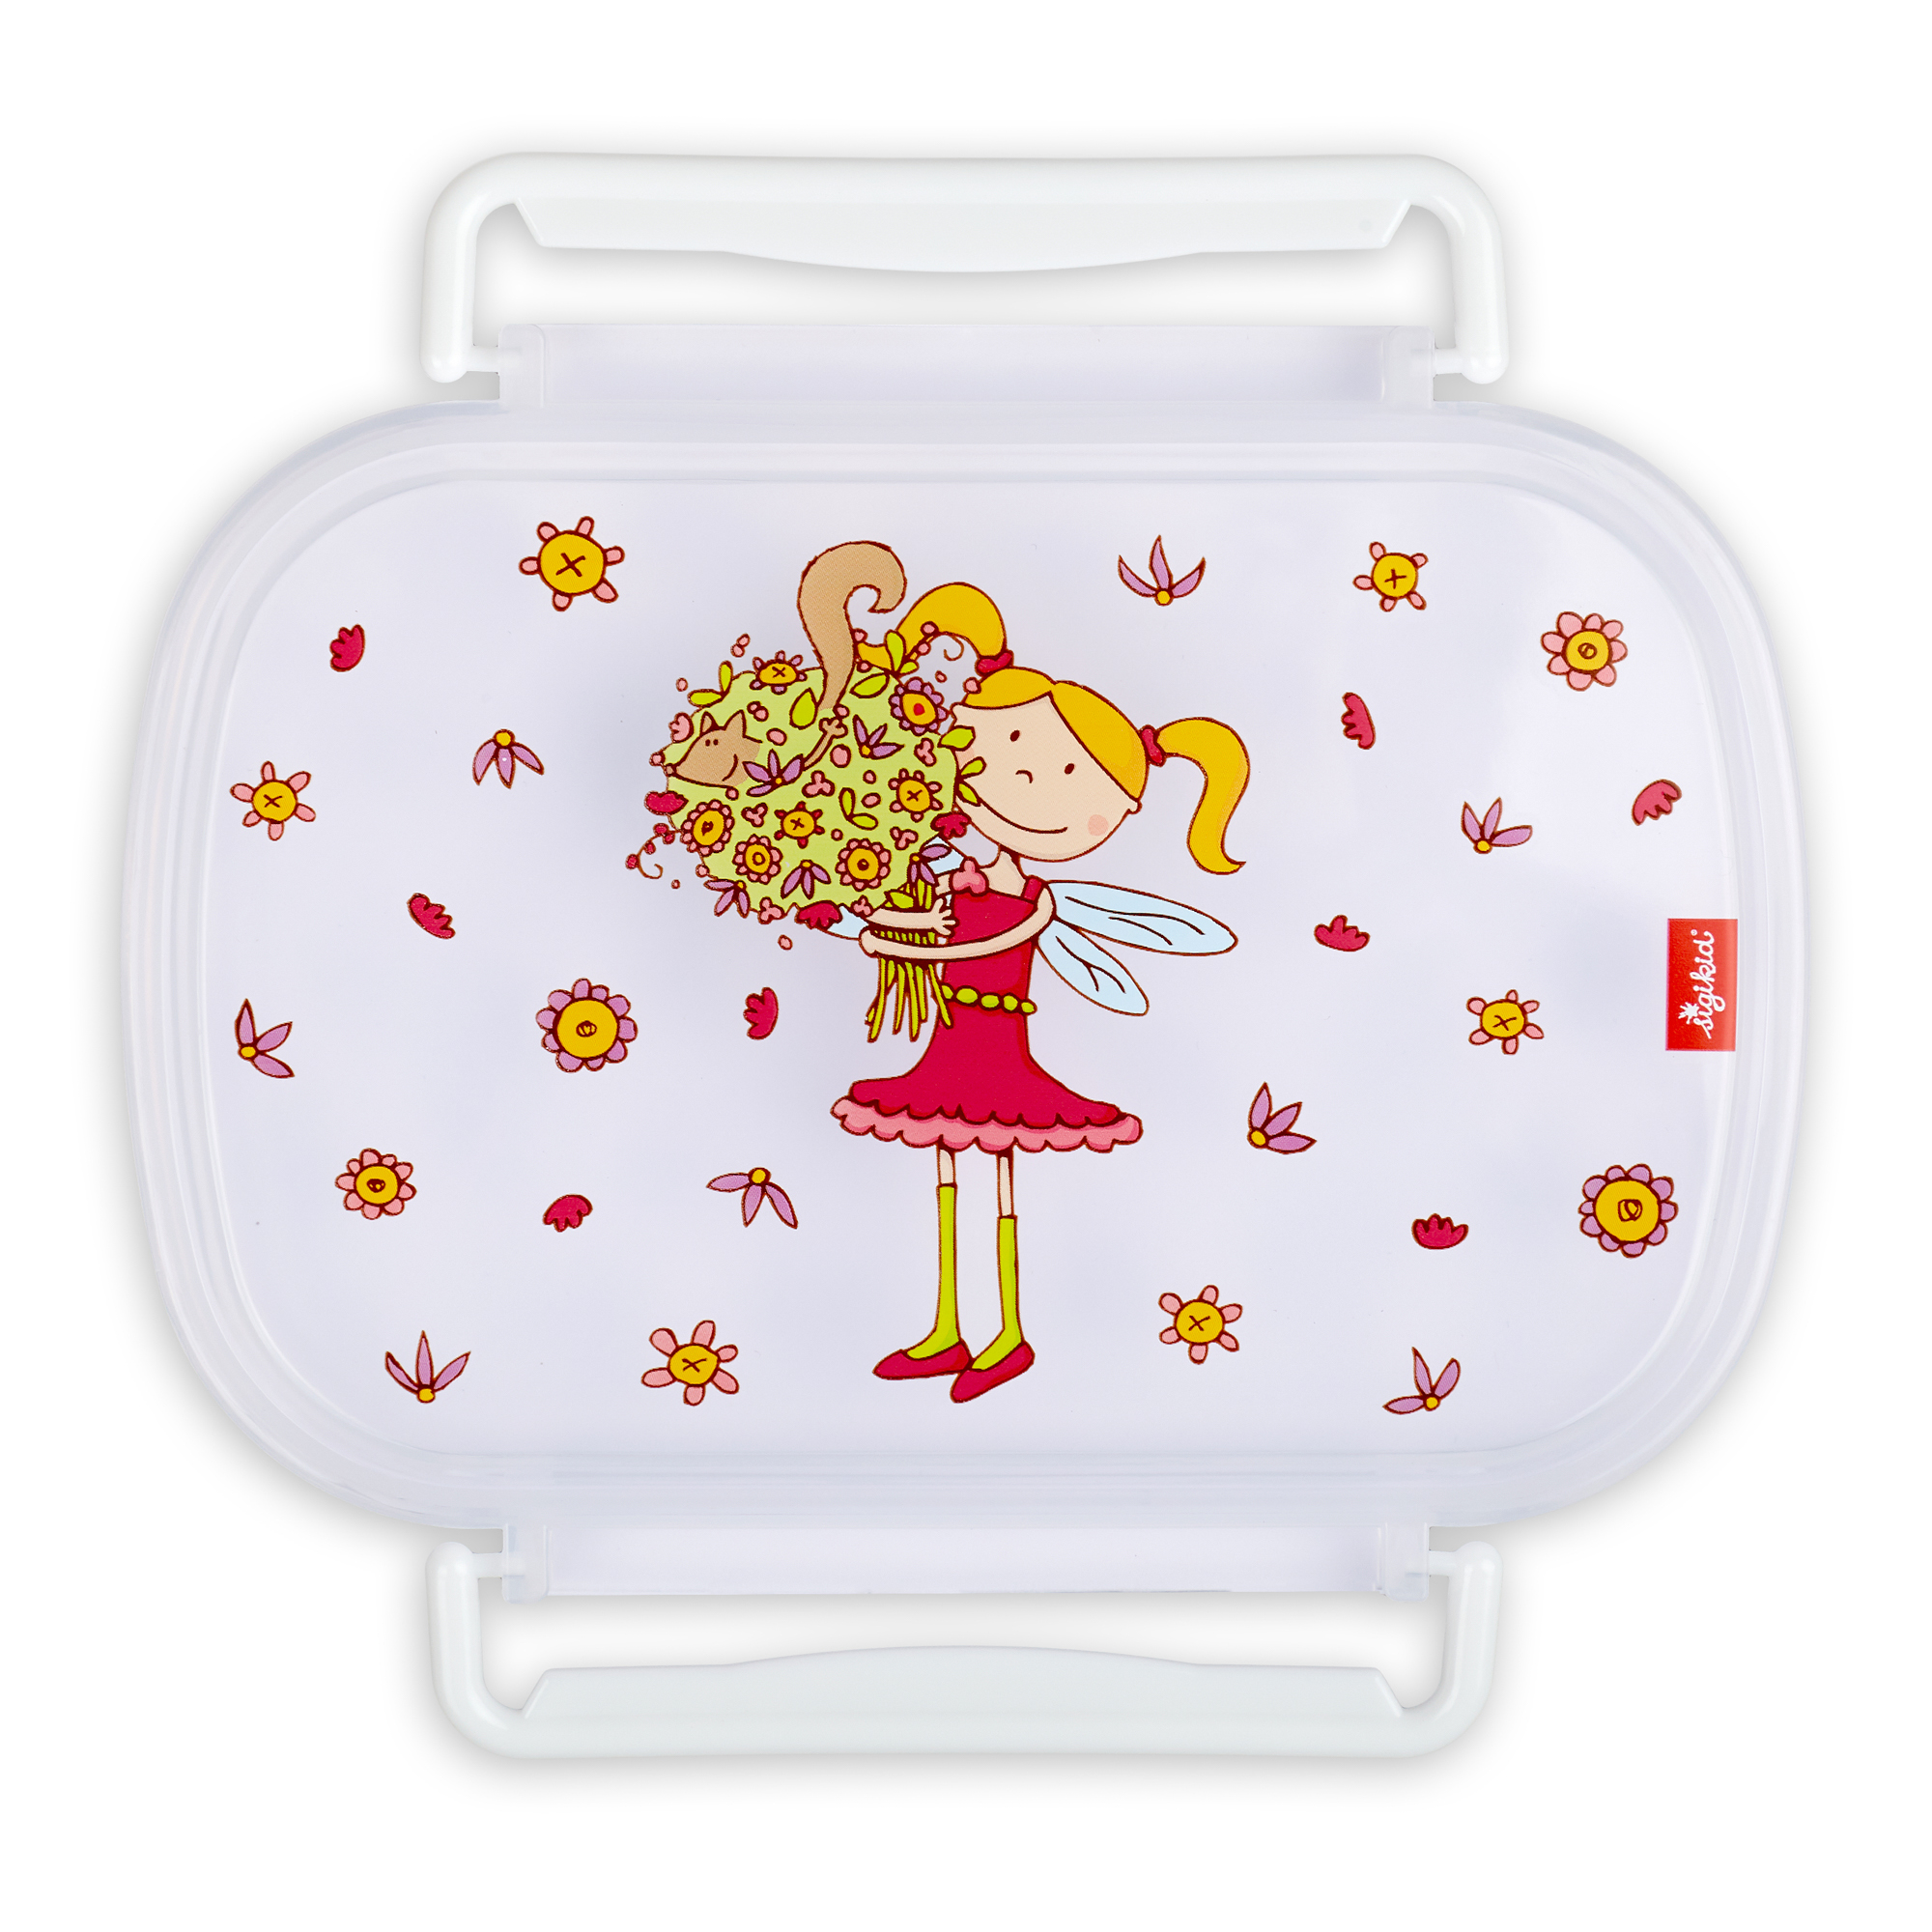 Lunch box lid replacement, fairy Florentine